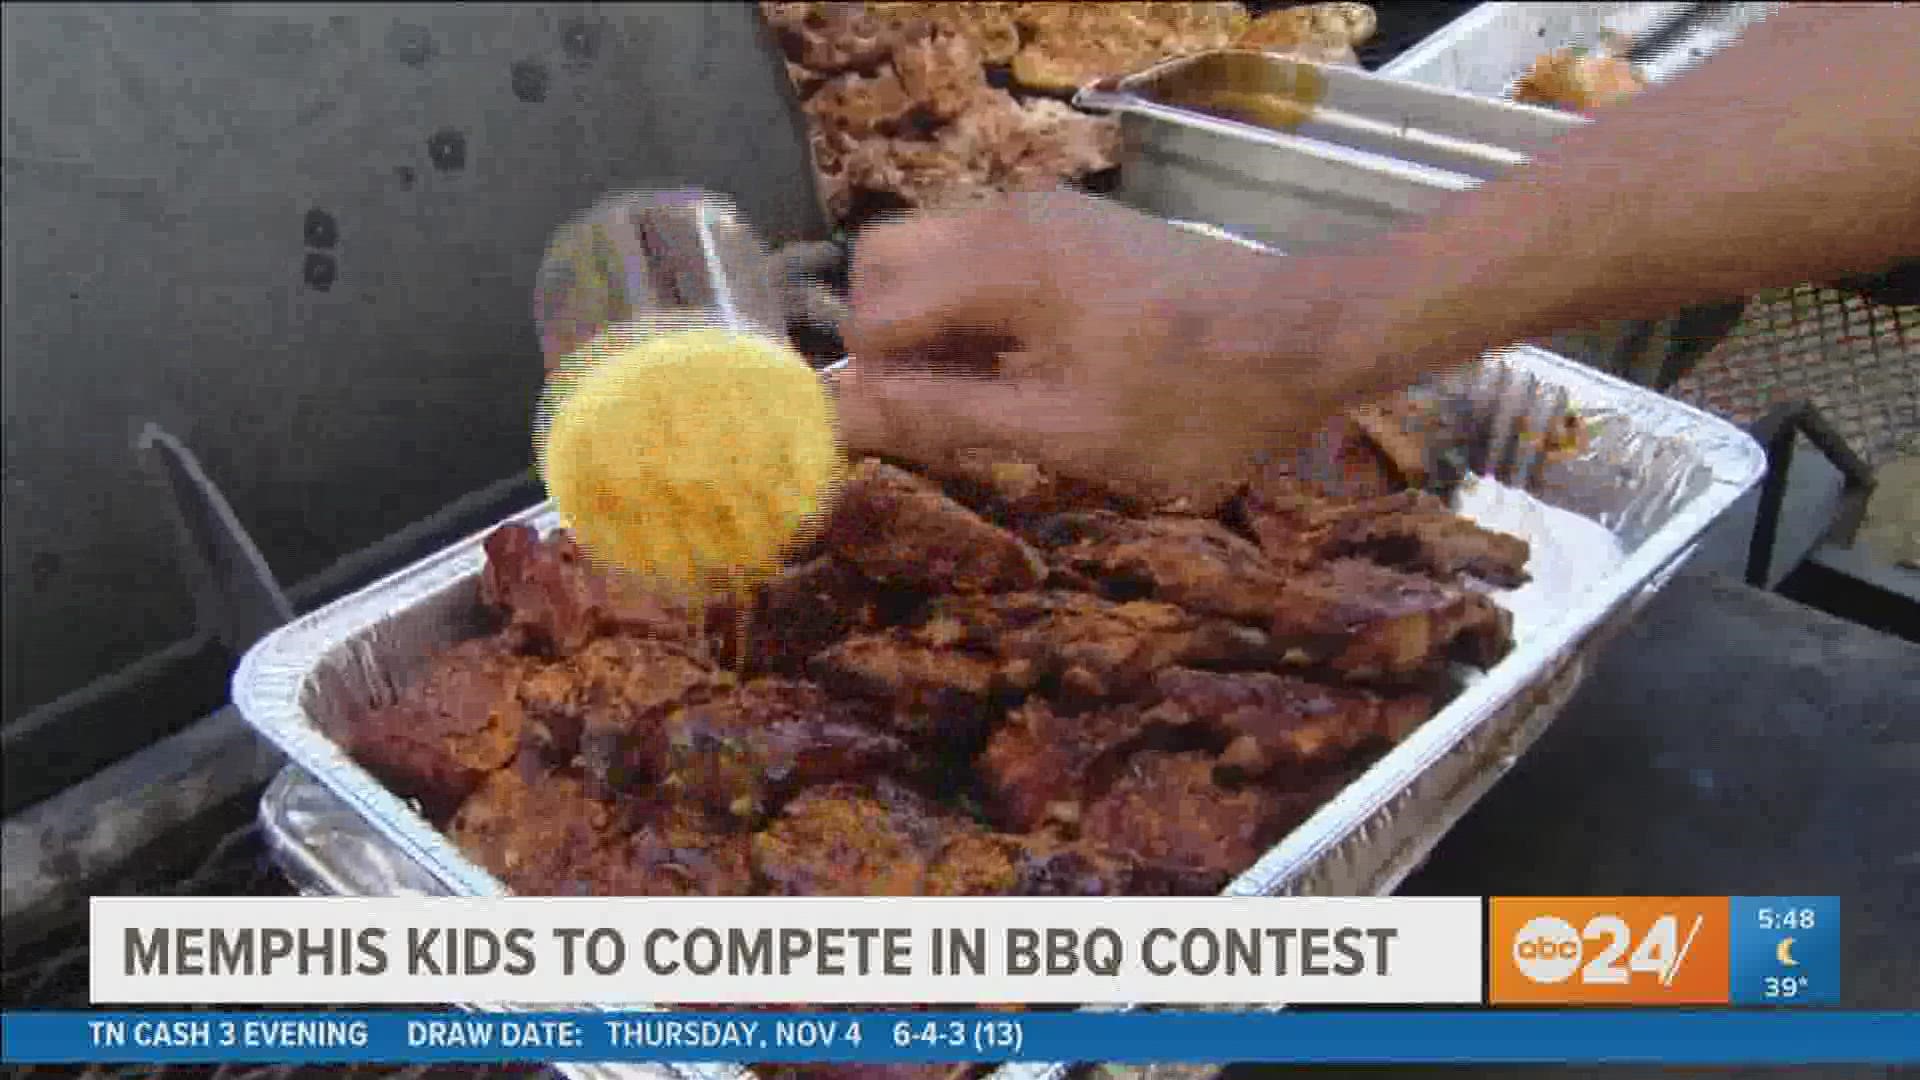 10 teams of kids, ages 14-18, will compete Saturday at AutoZone Park in a BBQ cooking championship